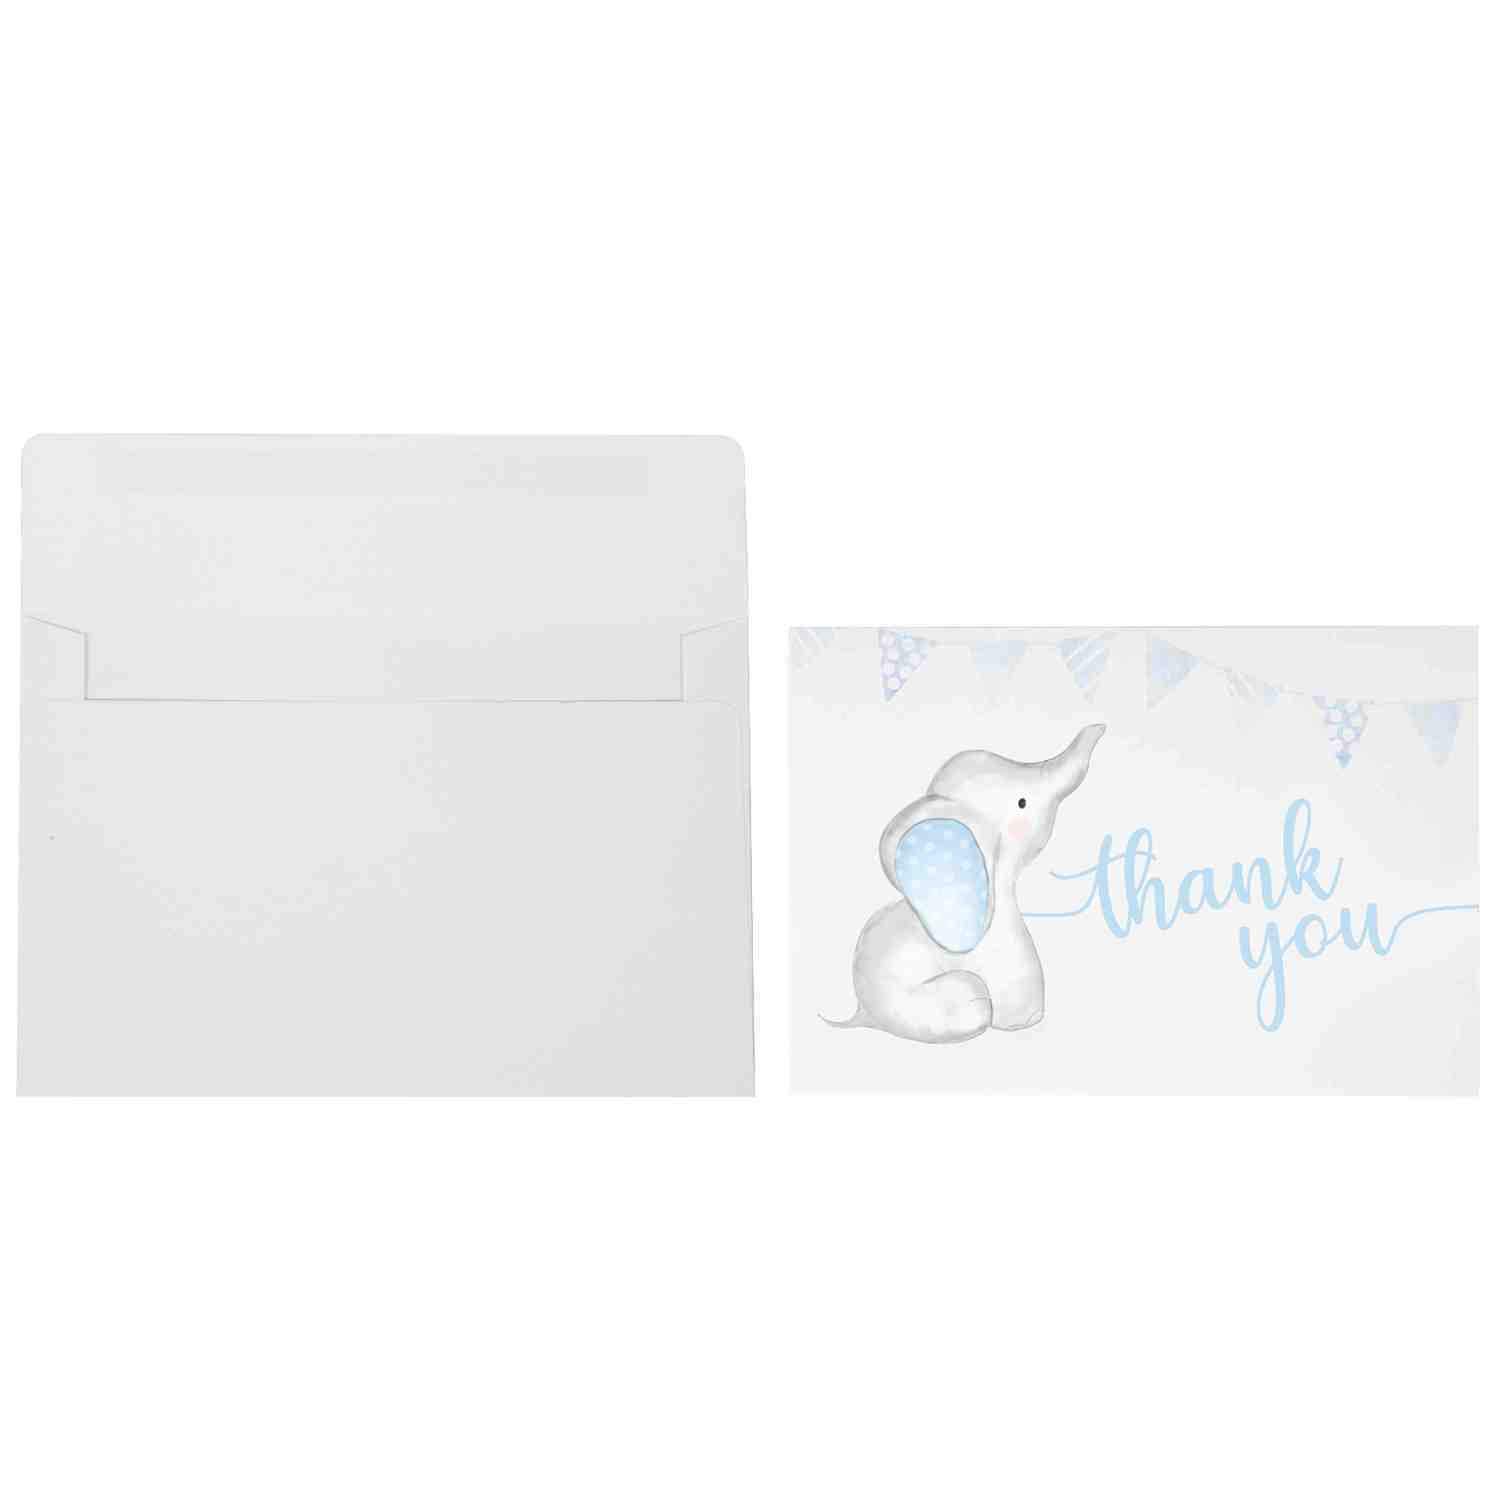 GSM Brands Thank You Cards for Baby Shower with Boy Theme - 20 Cards with Envelopes (4 inch x 6 inch)